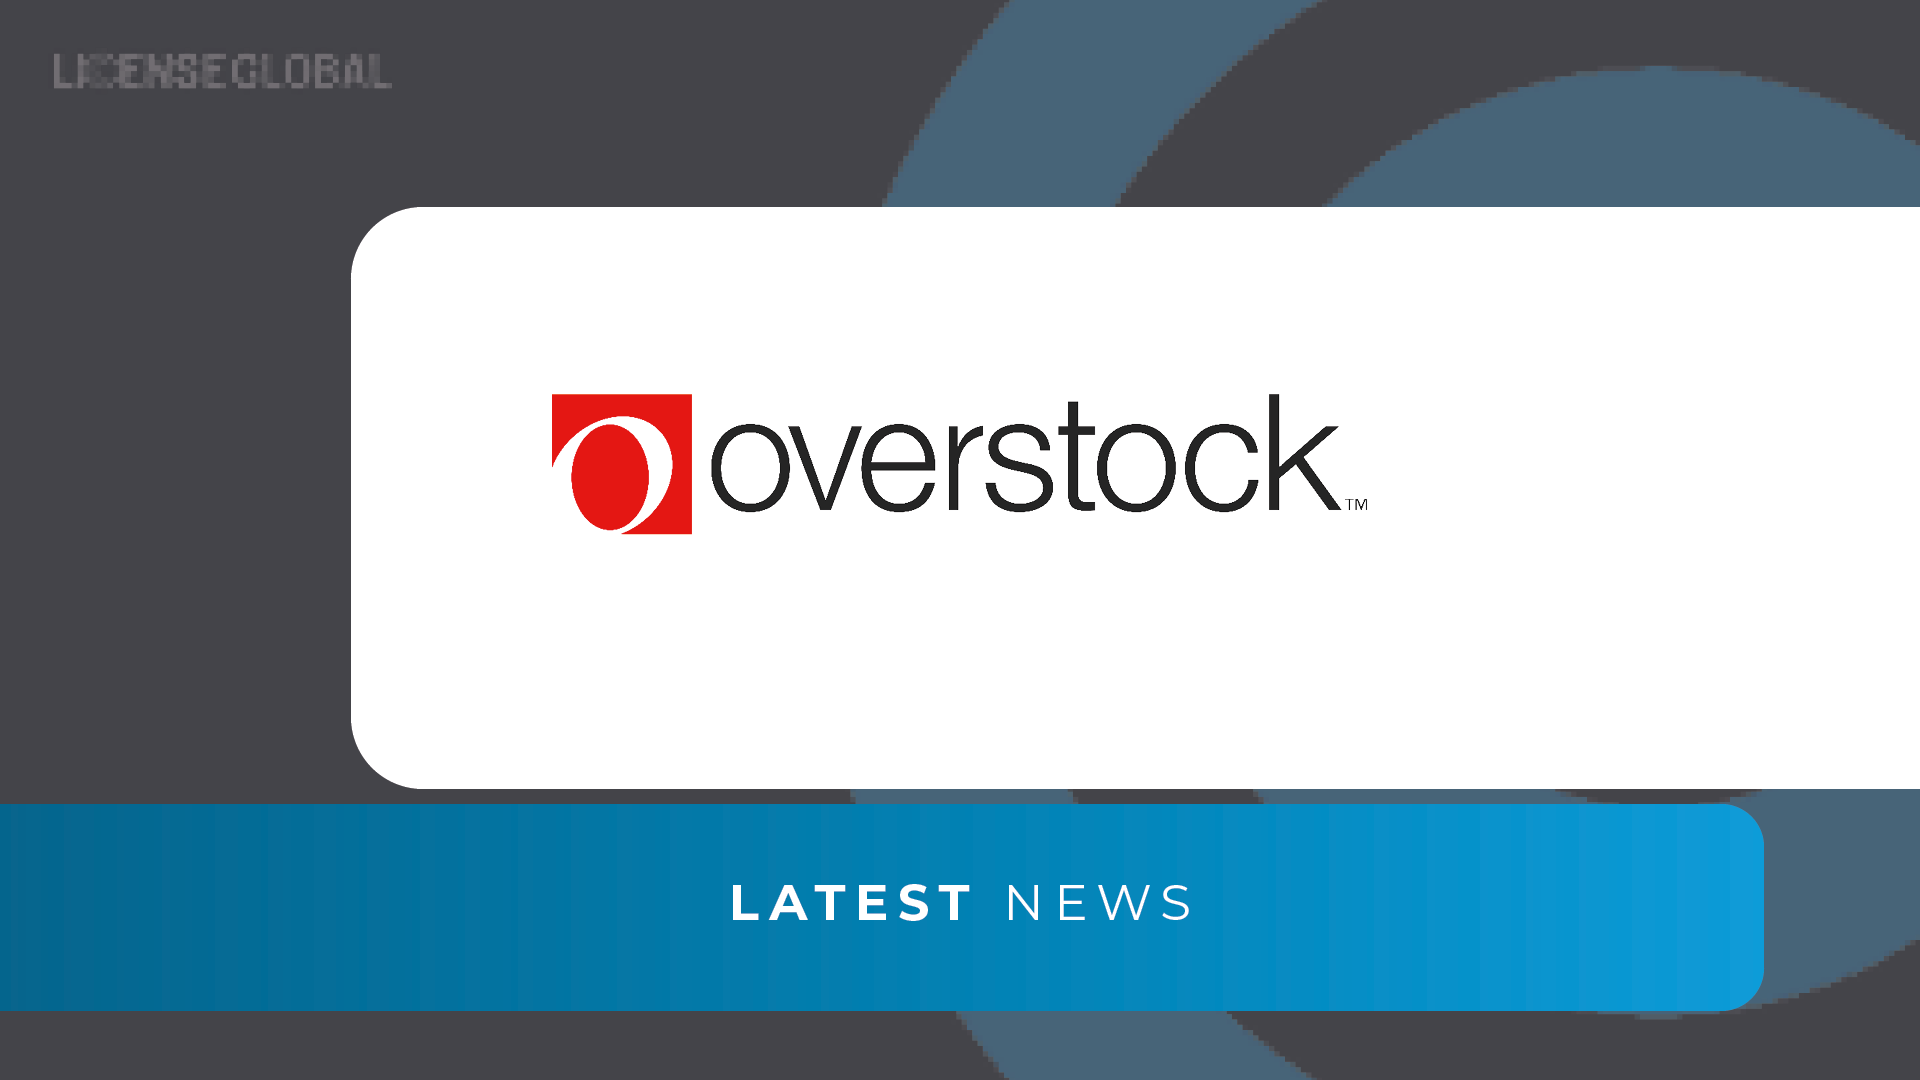 Overstock Acquires Bed Bath & Beyond Brand and Other IP | License Global